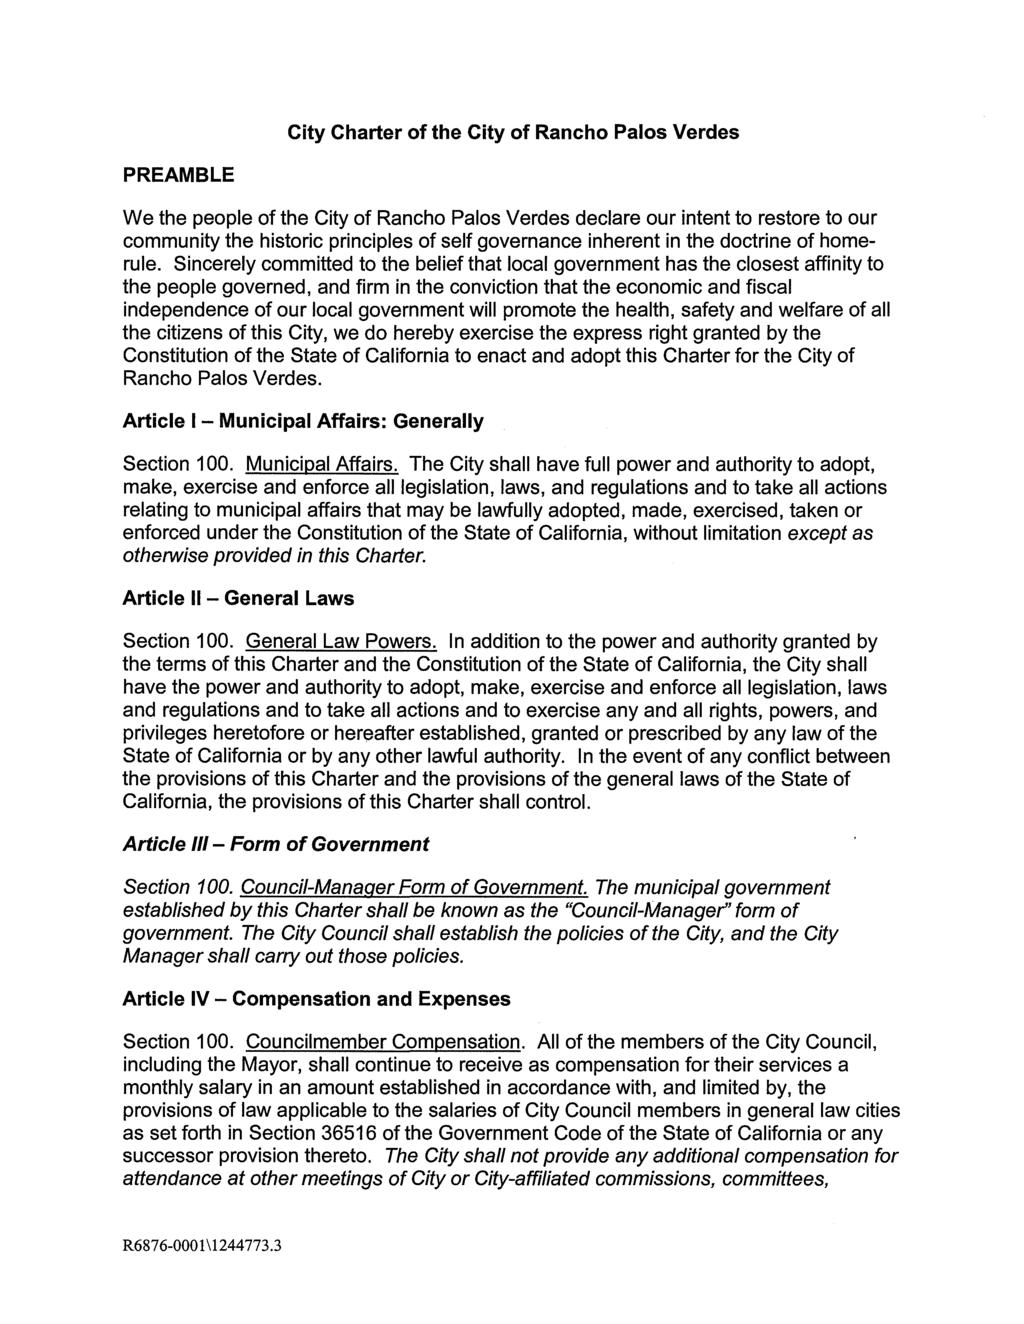 City Charter of the City of Rancho Palos Verdes PREAMBLE We the people of the City of Rancho Palos Verdes declare our intent to restore to our community the historic principles of self governance